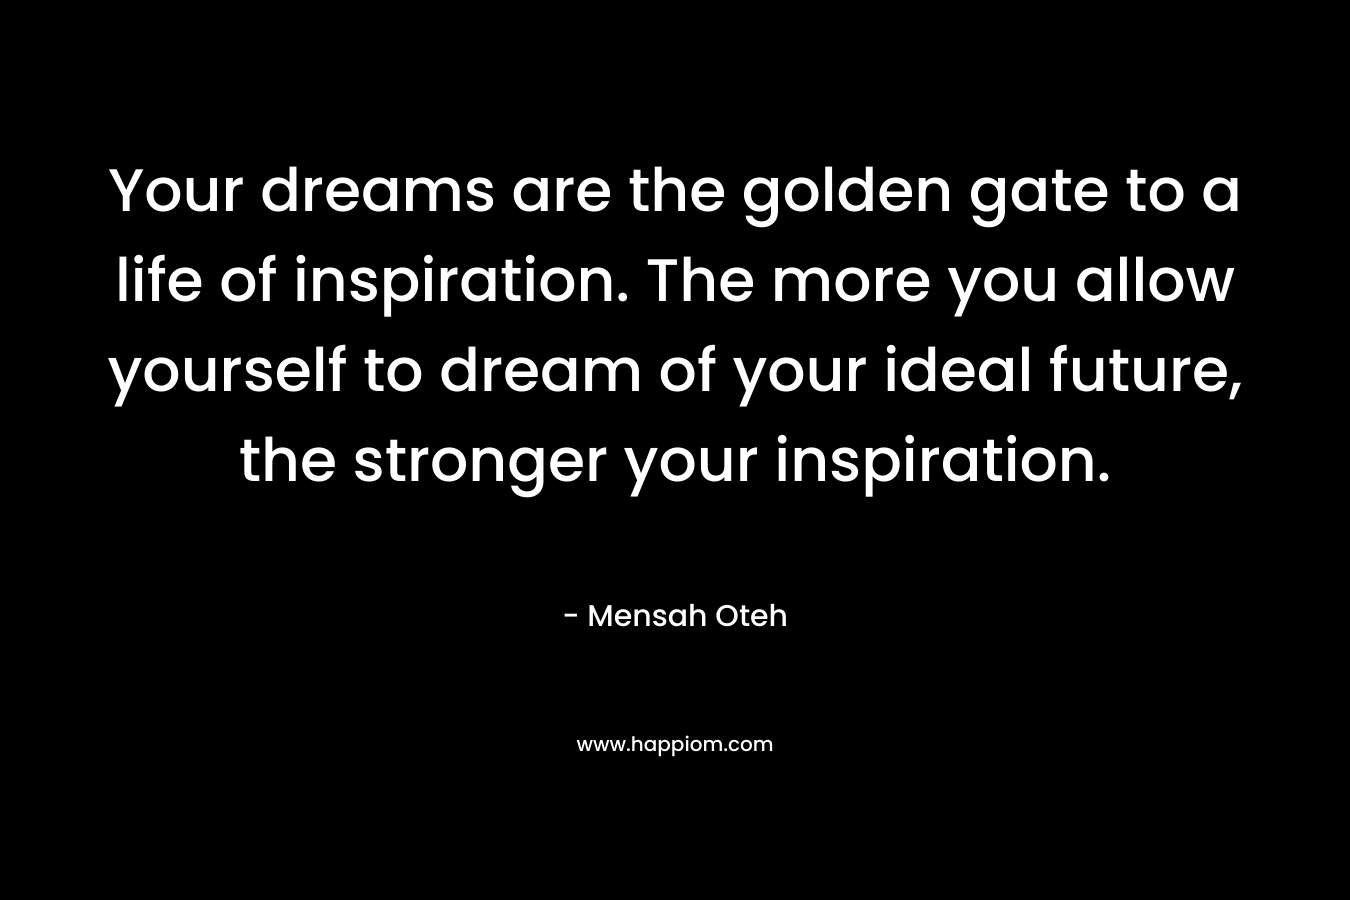 Your dreams are the golden gate to a life of inspiration. The more you allow yourself to dream of your ideal future, the stronger your inspiration.